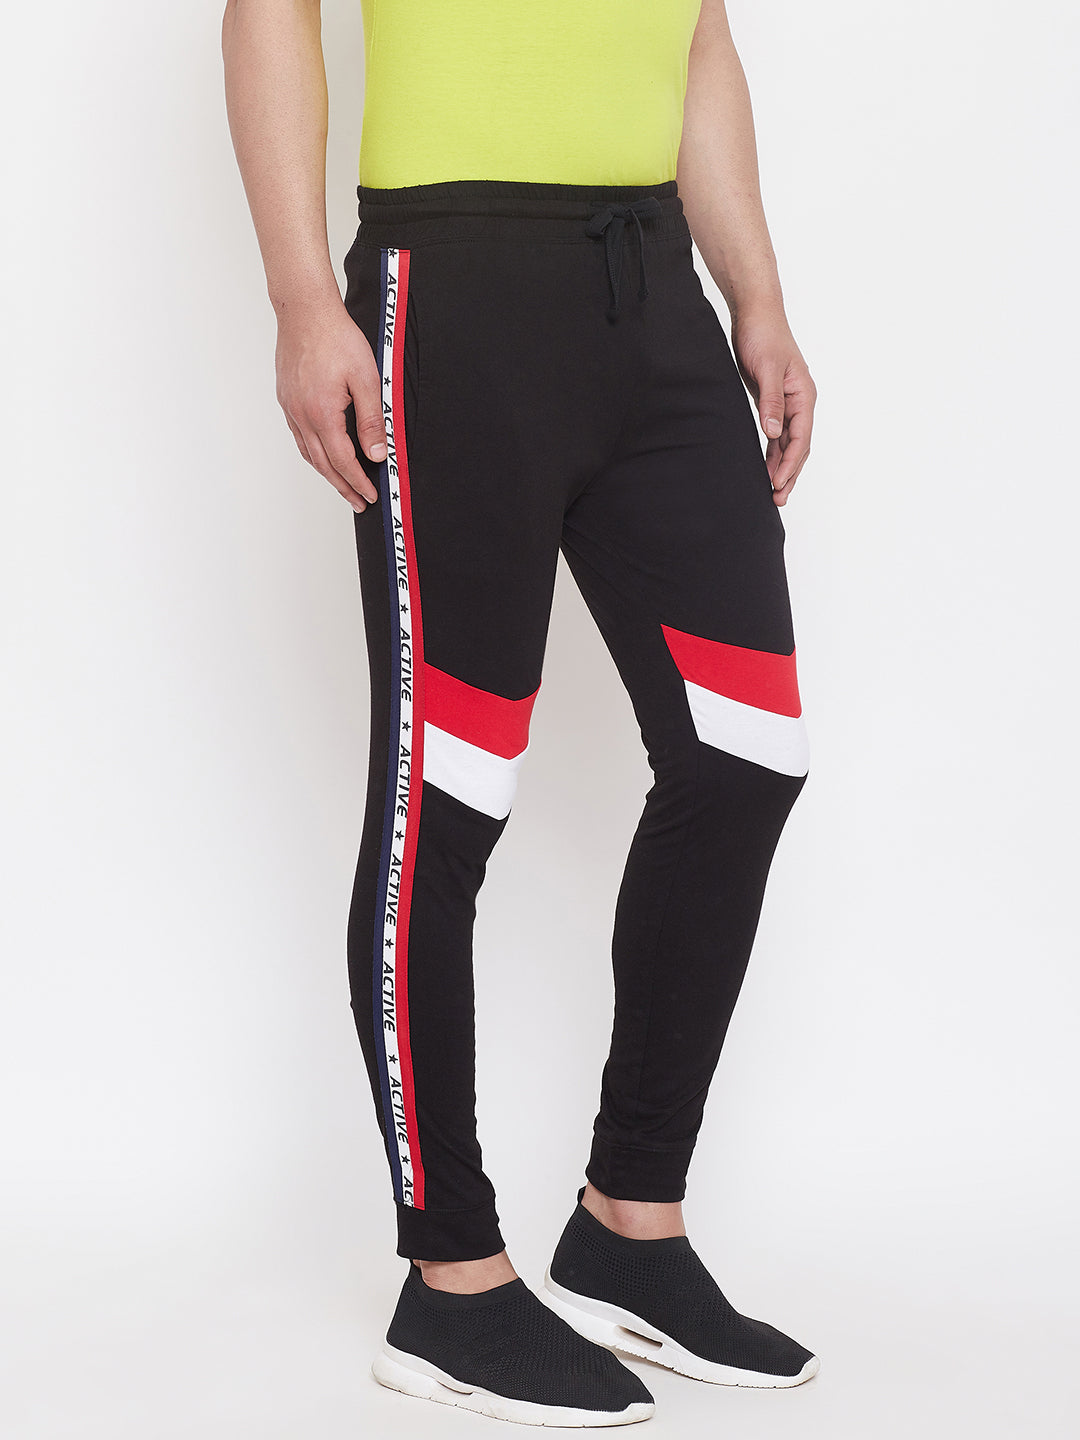 Black/Red/White Men'S Slim Fit Joggers With Color Block Side Taping